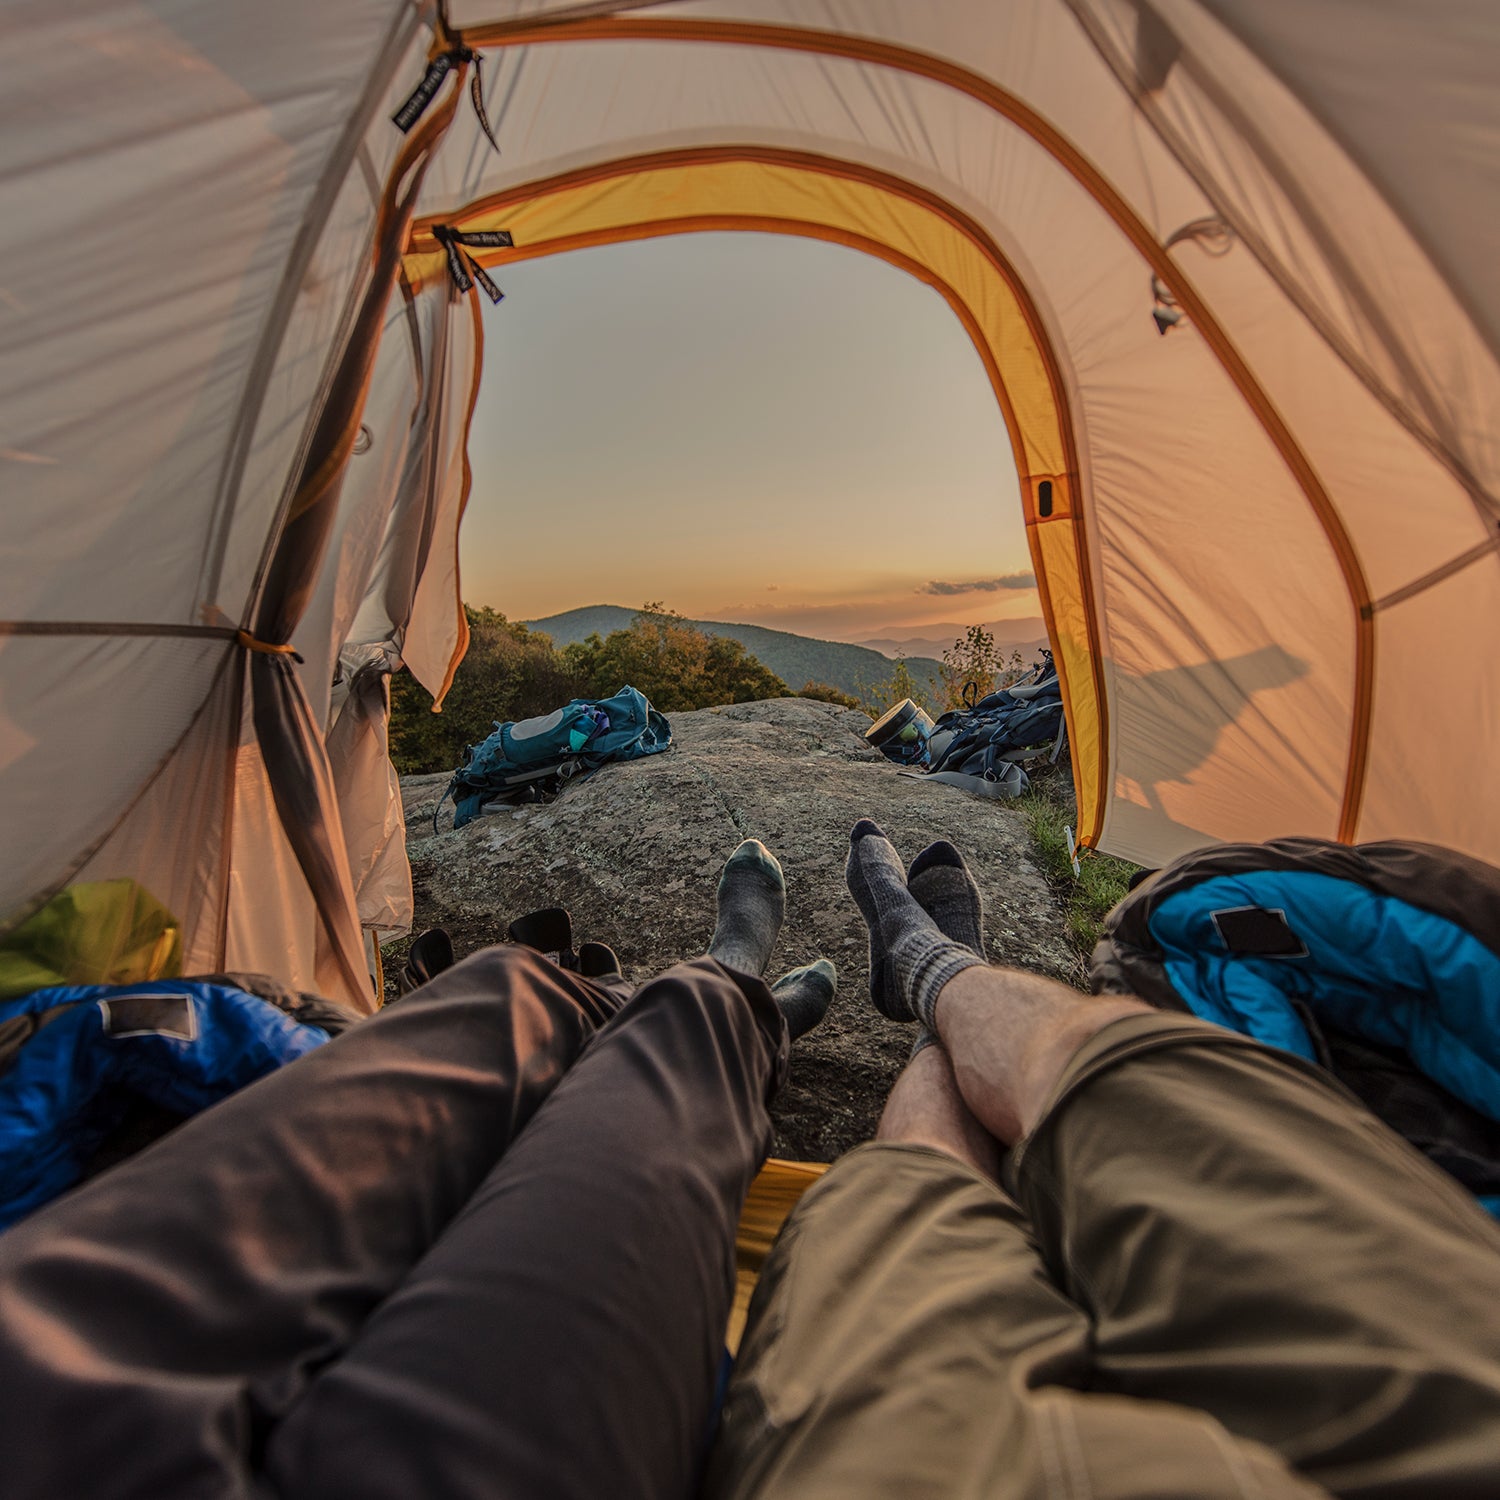 View Tents Camping On Image & Photo (Free Trial)